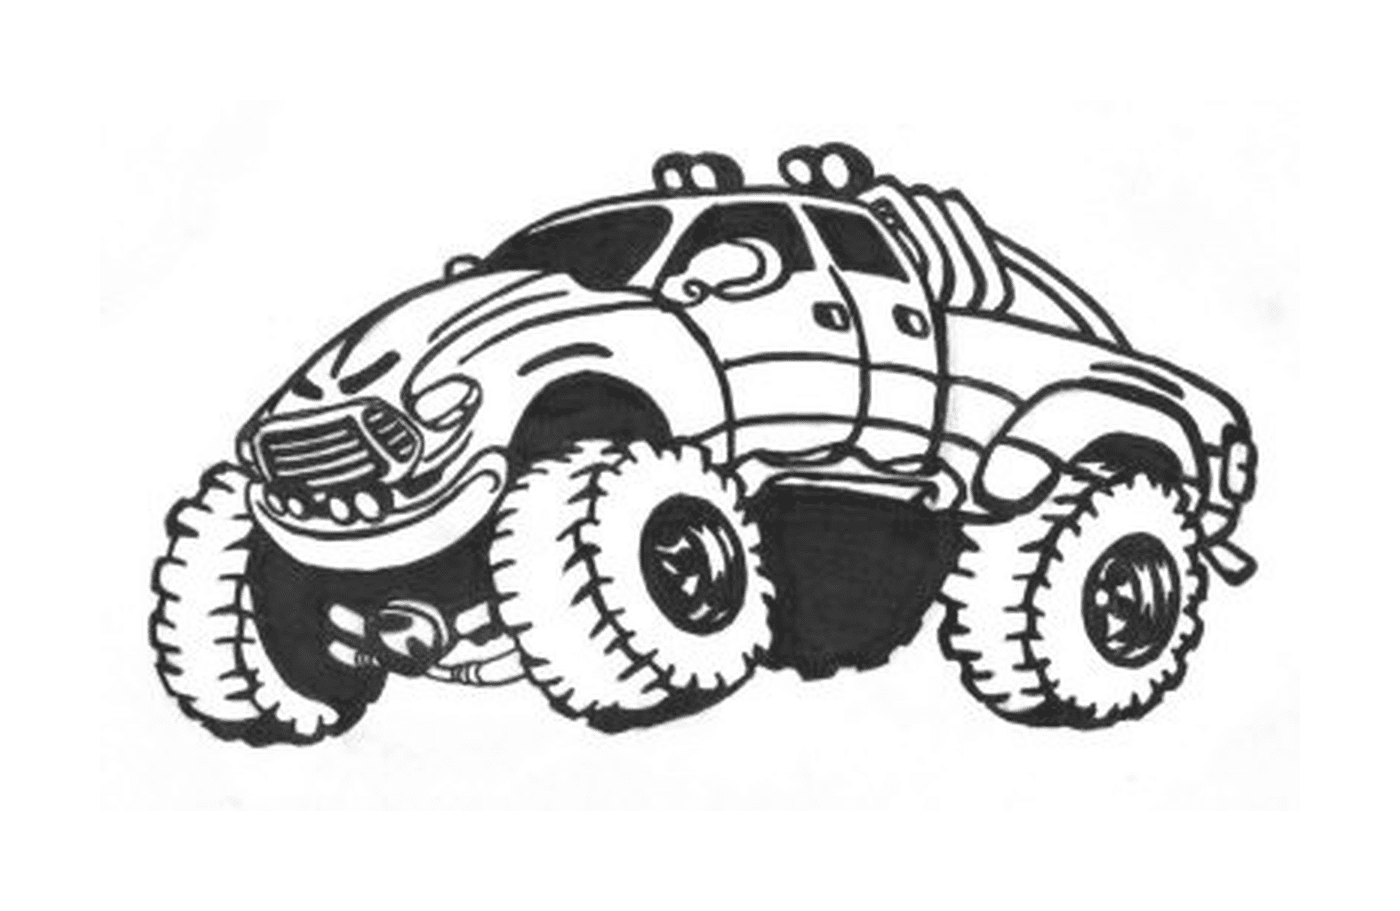   Image voiture 4x4, monster truck 